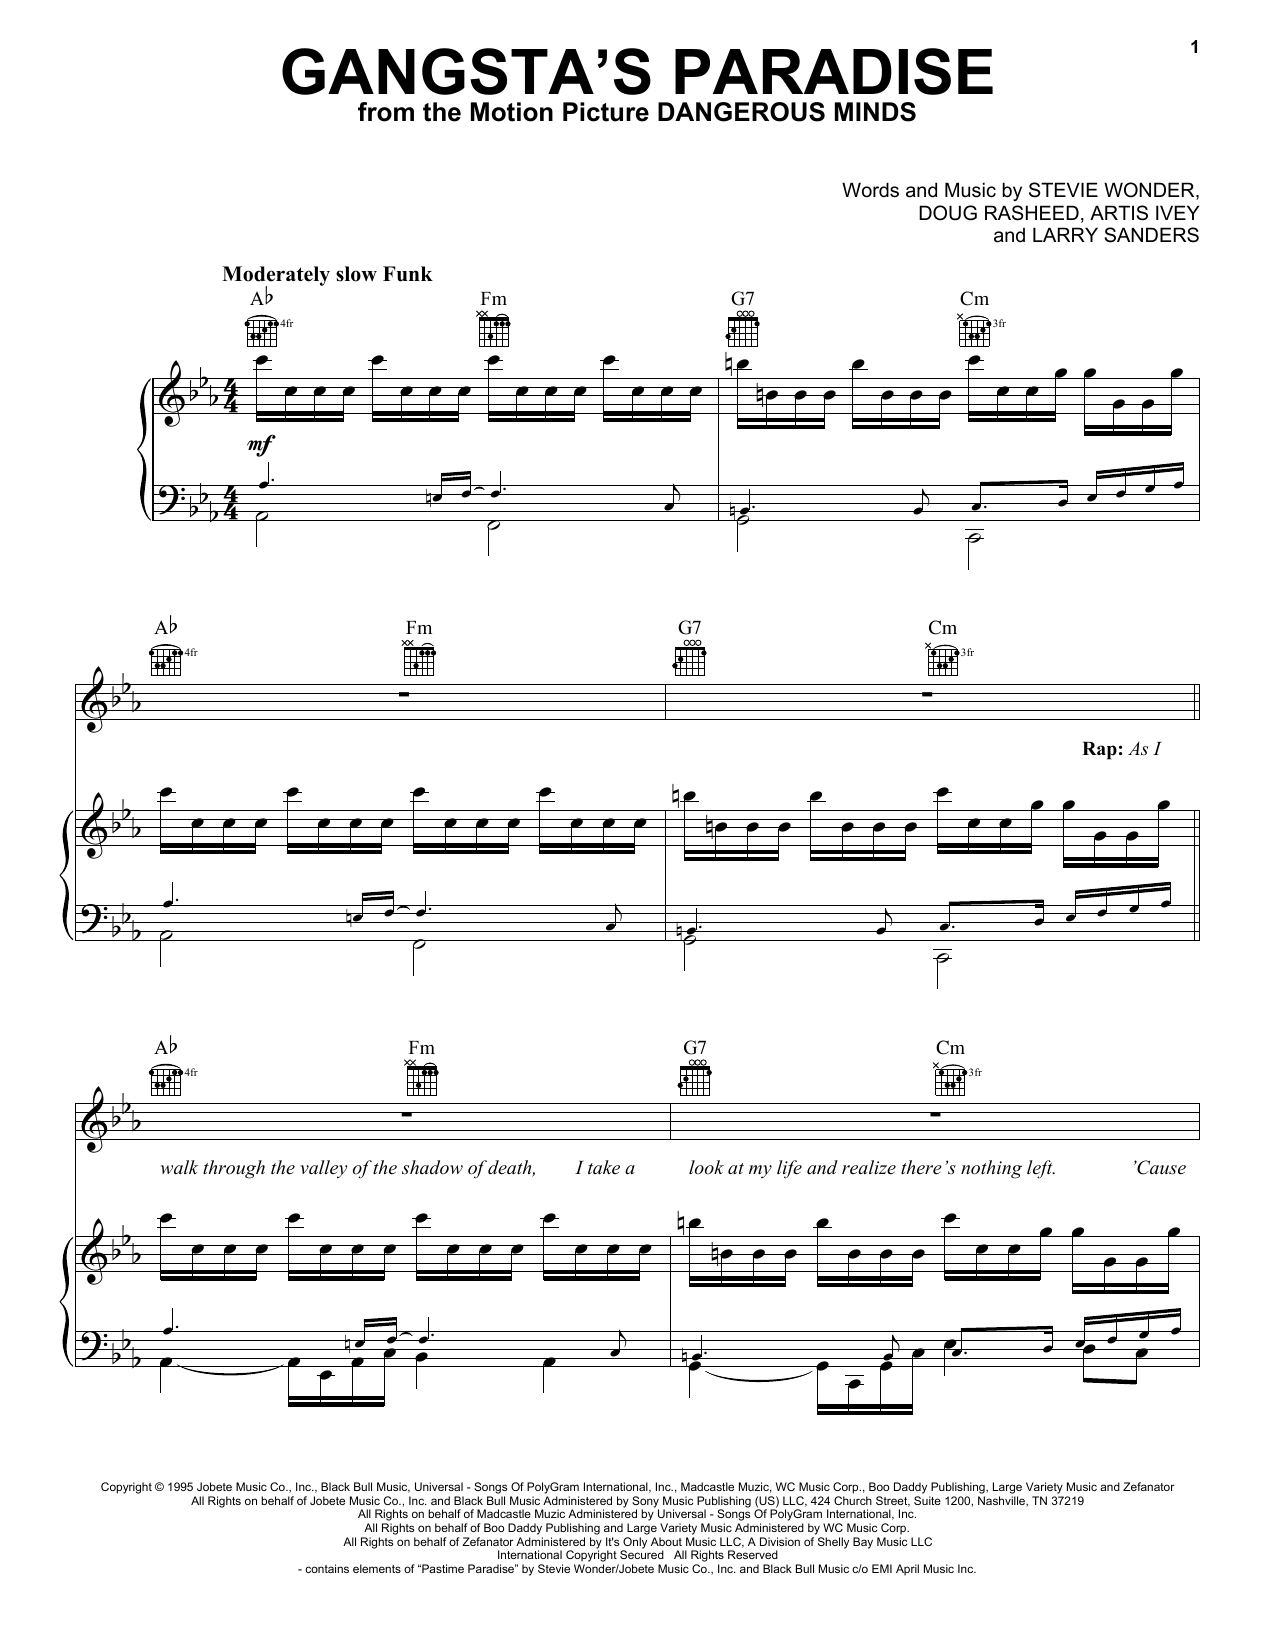 Coolio ft. L.V. Gangsta's Paradise sheet music notes and chords. Download Printable PDF.